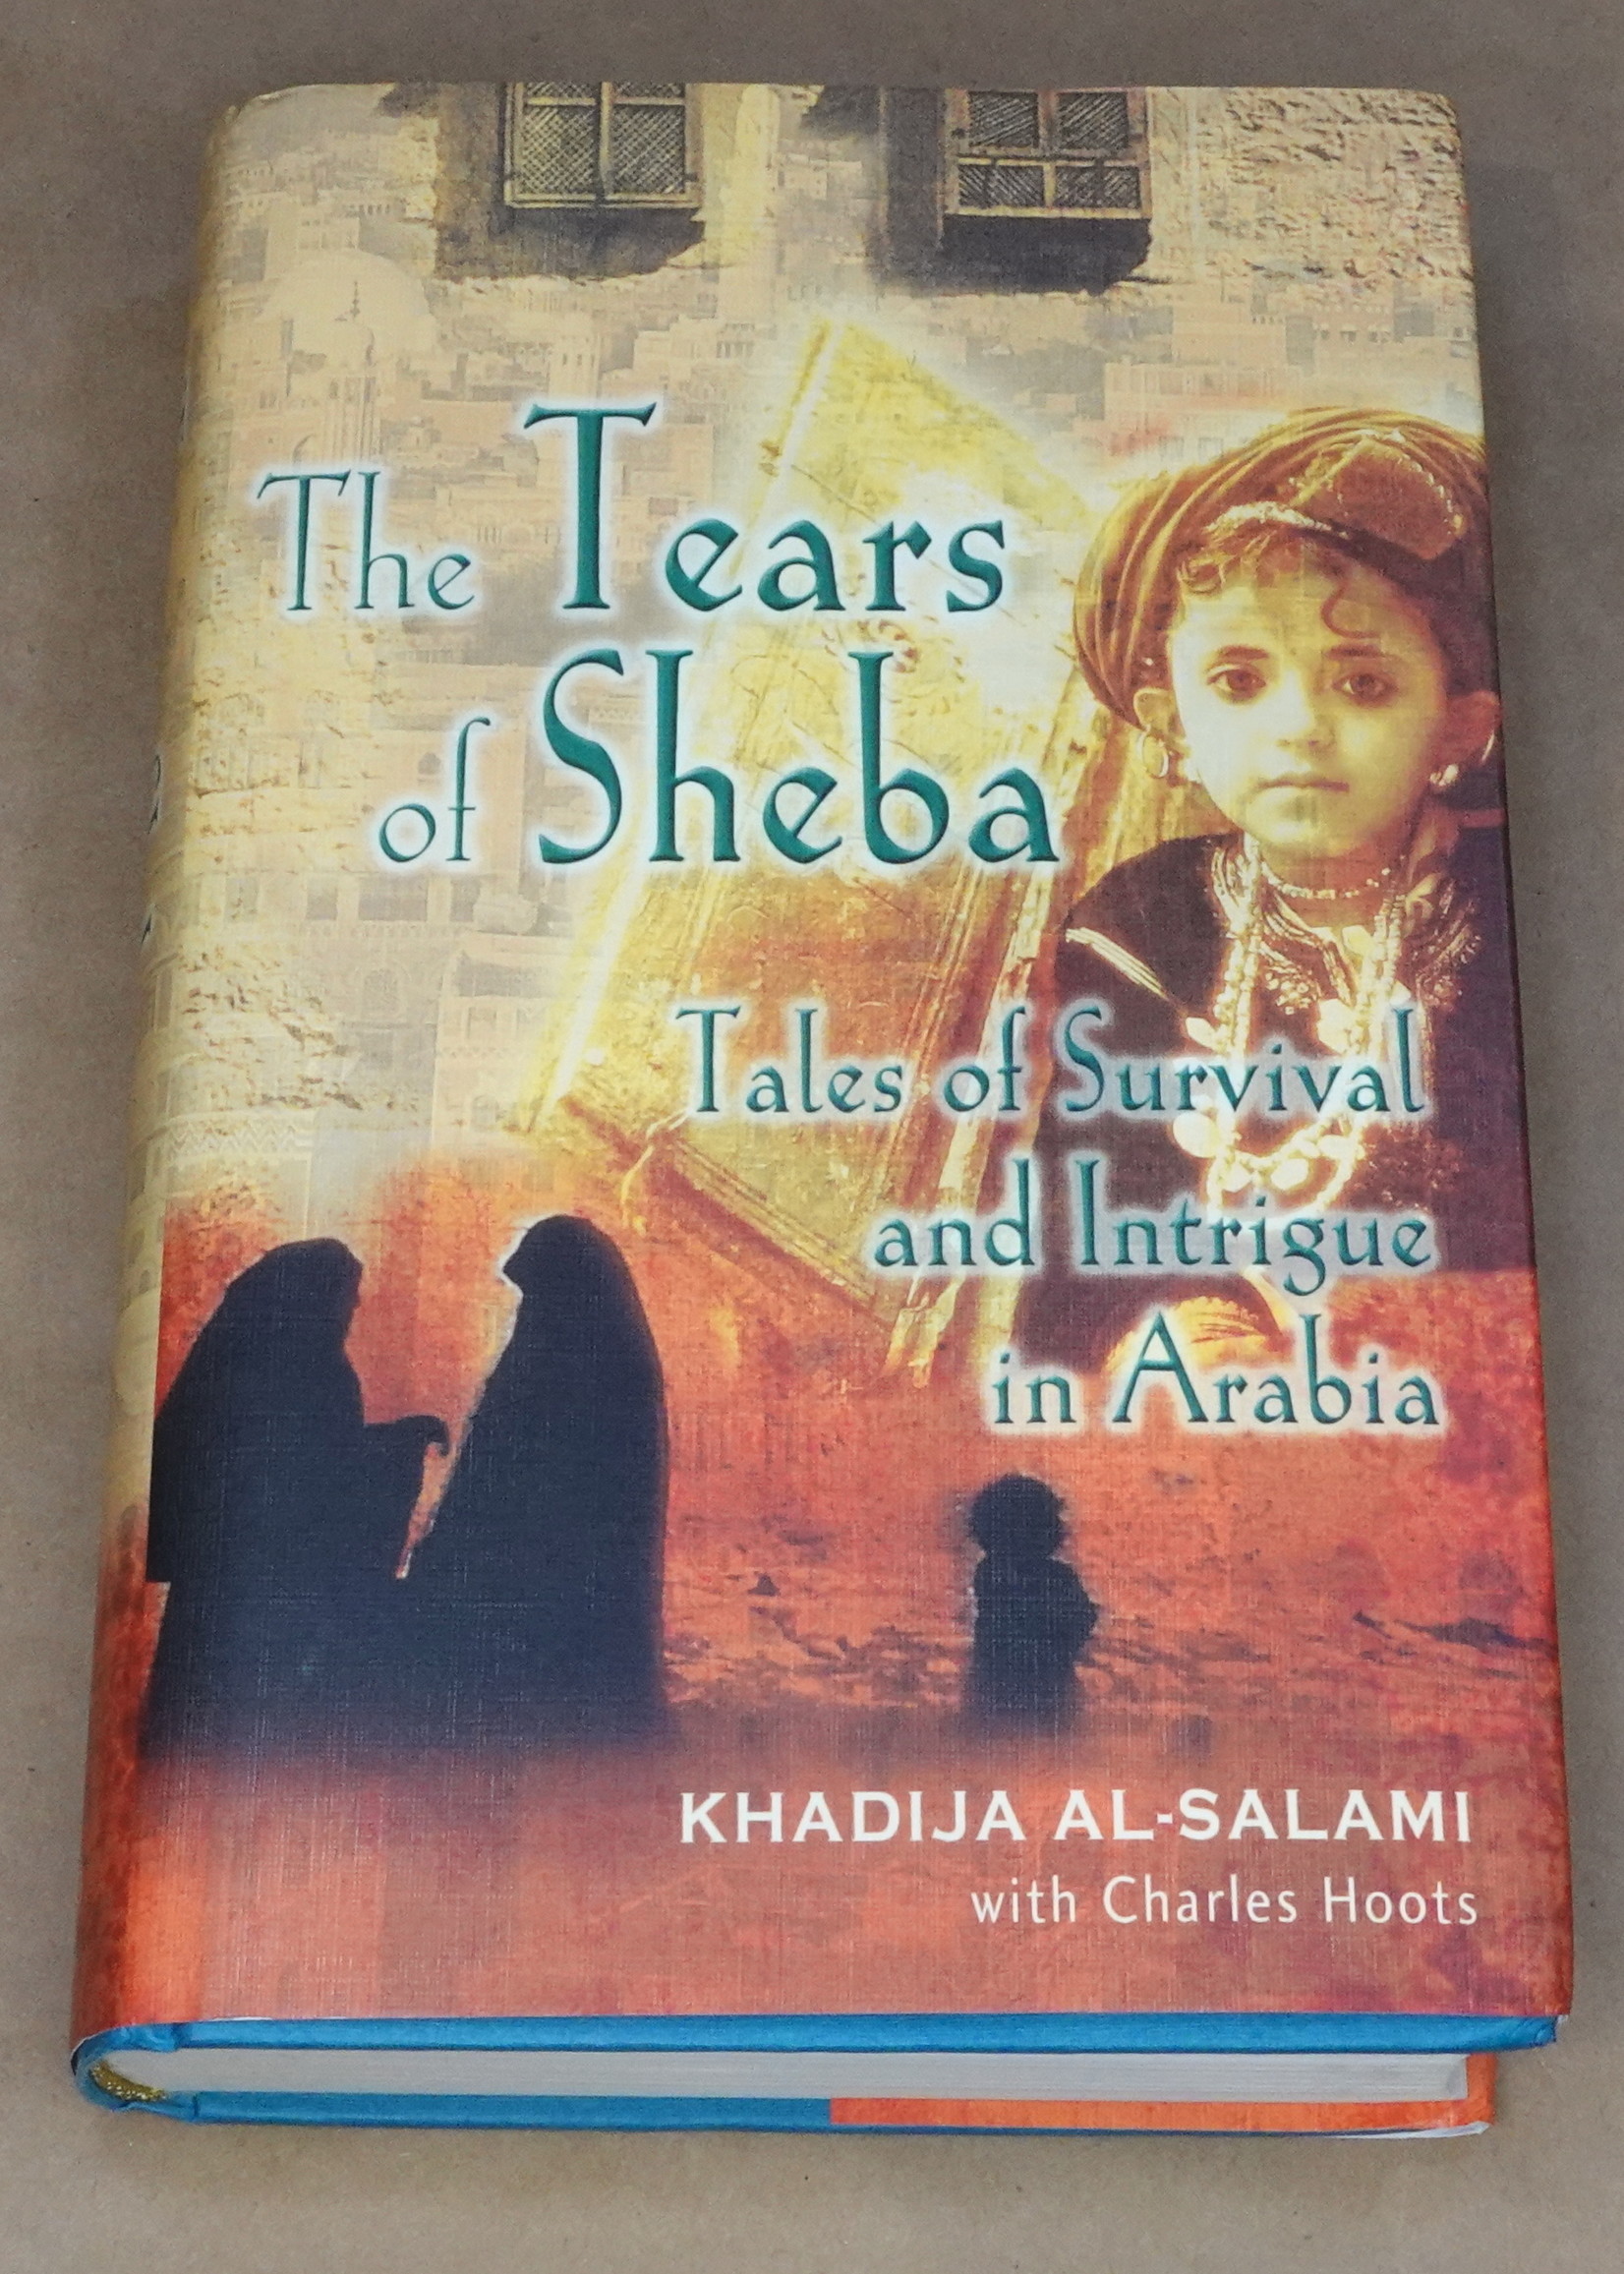 The Tears of Sheba: Tales of Survival and Intrigue in Arabia